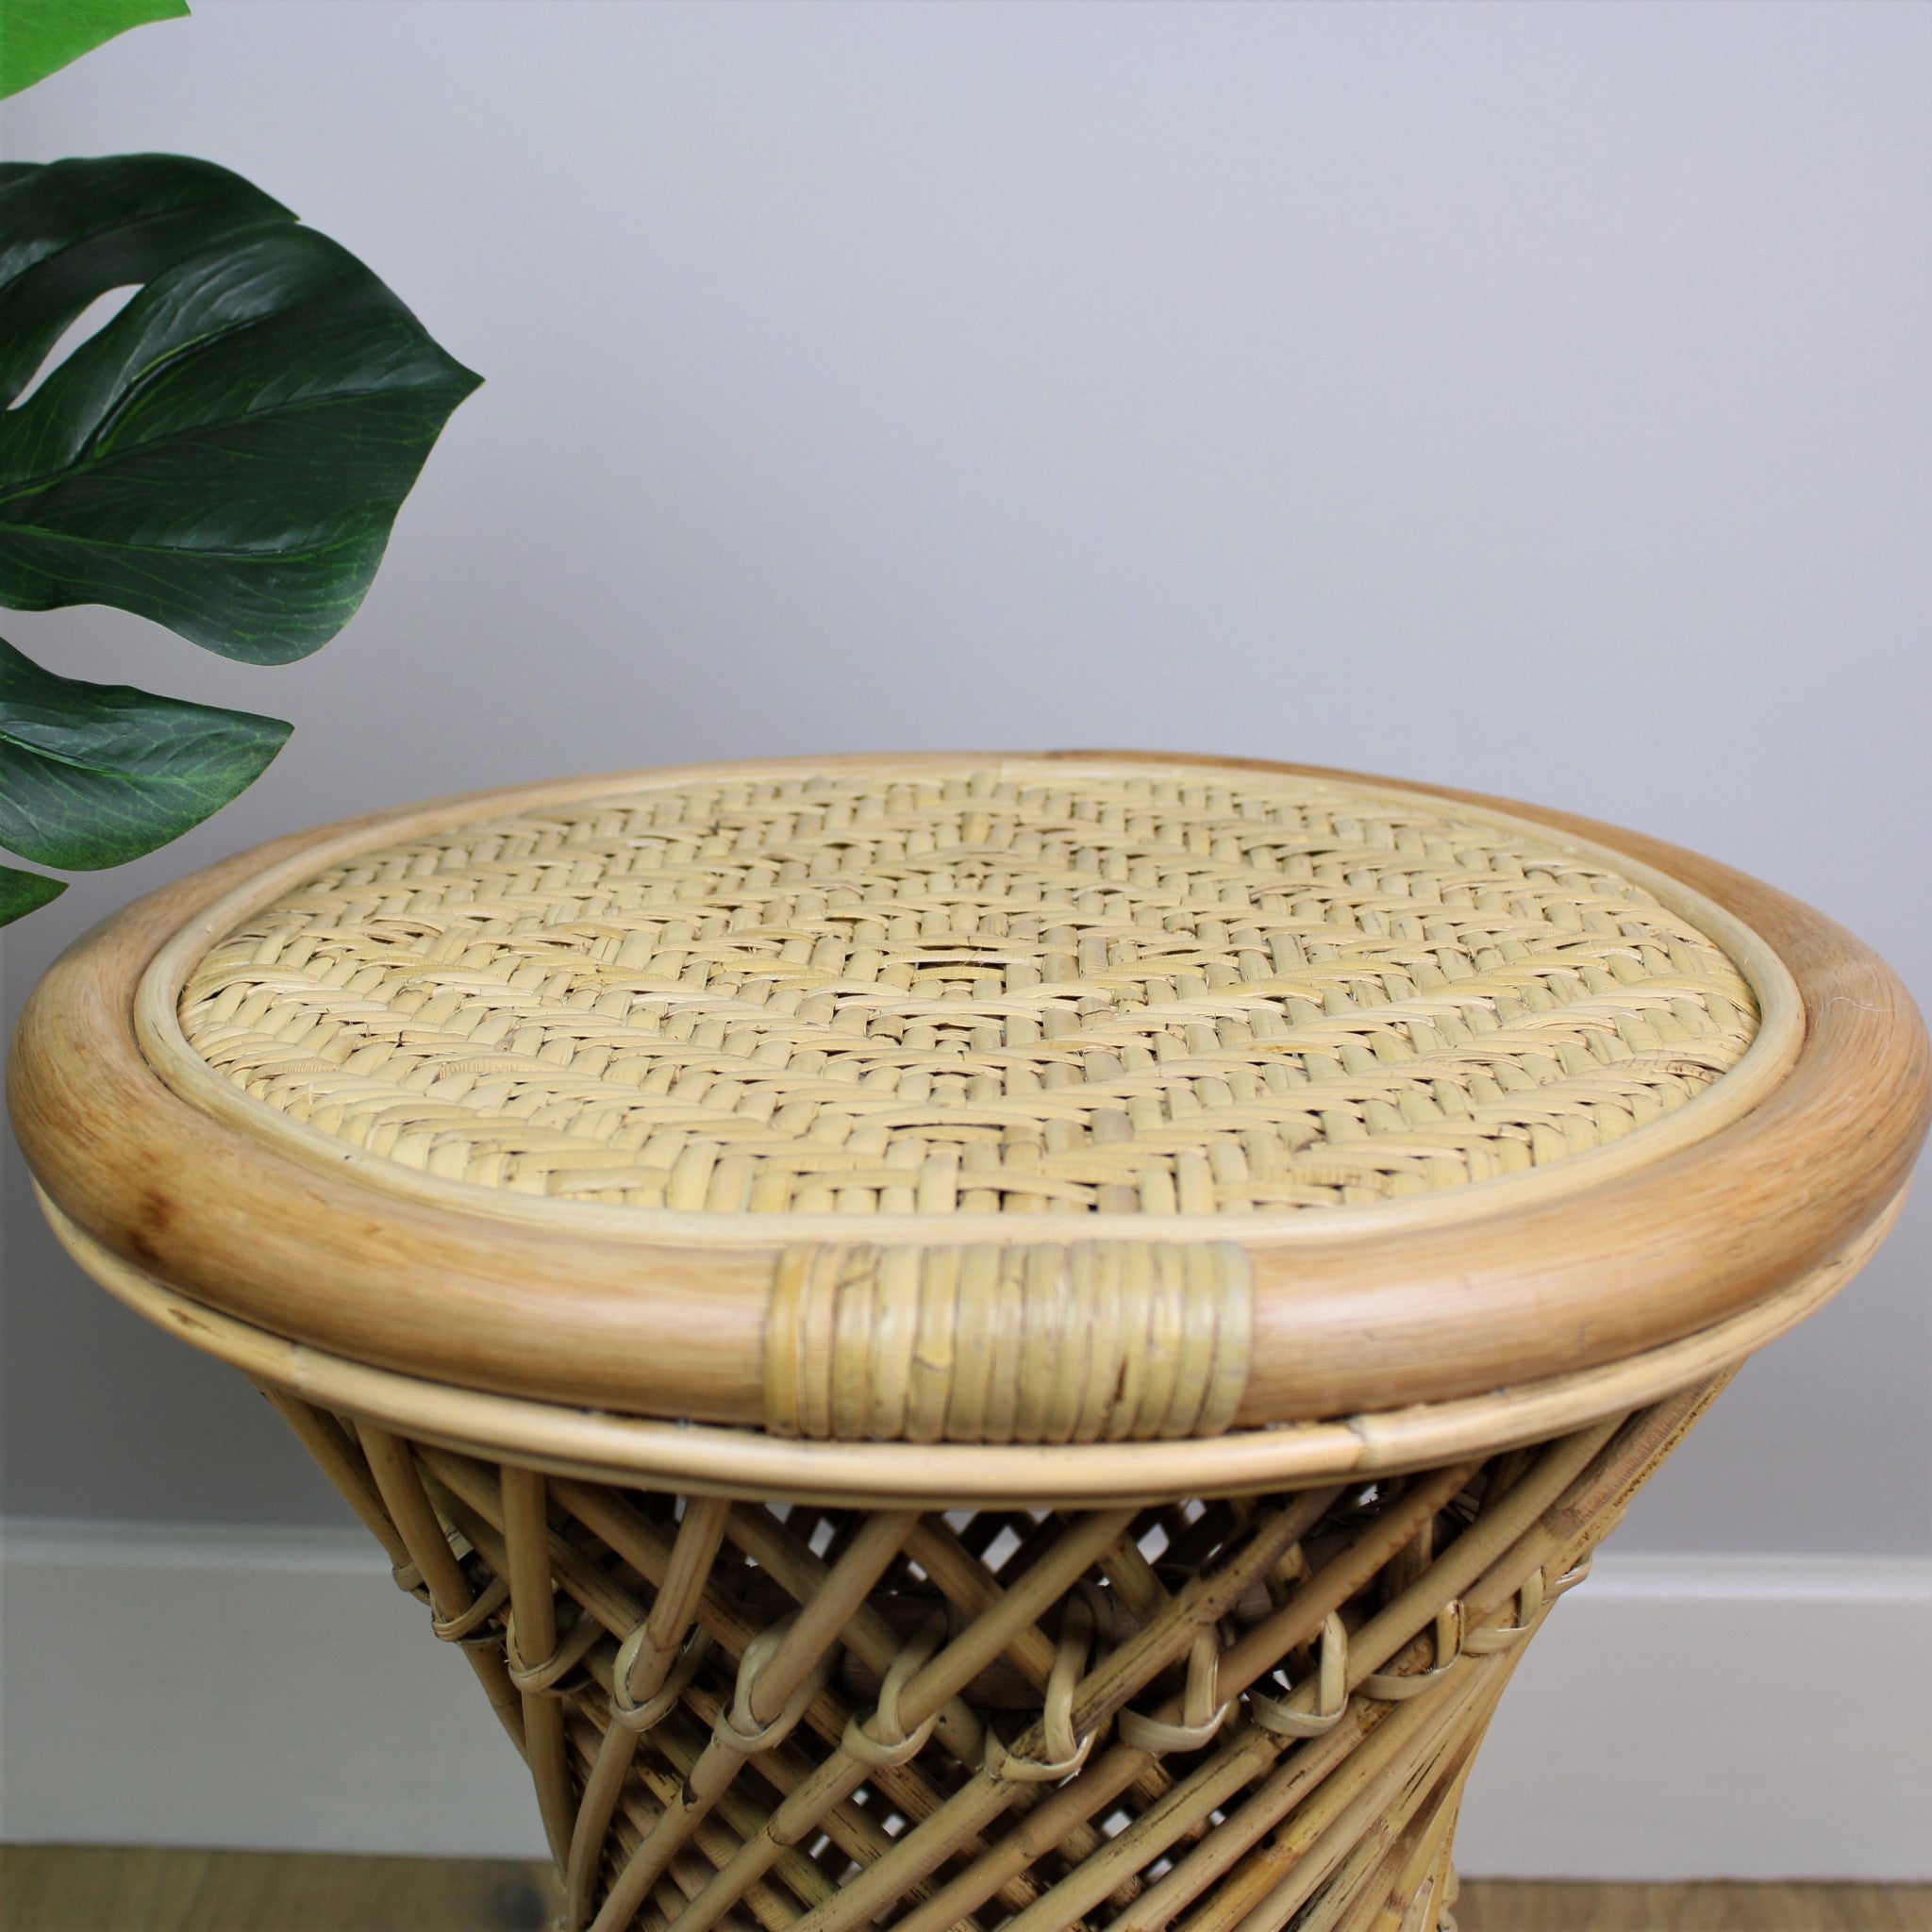 Natural Rattan Cane Koko Stool with Wicker Seat Detail - The Rattan Company